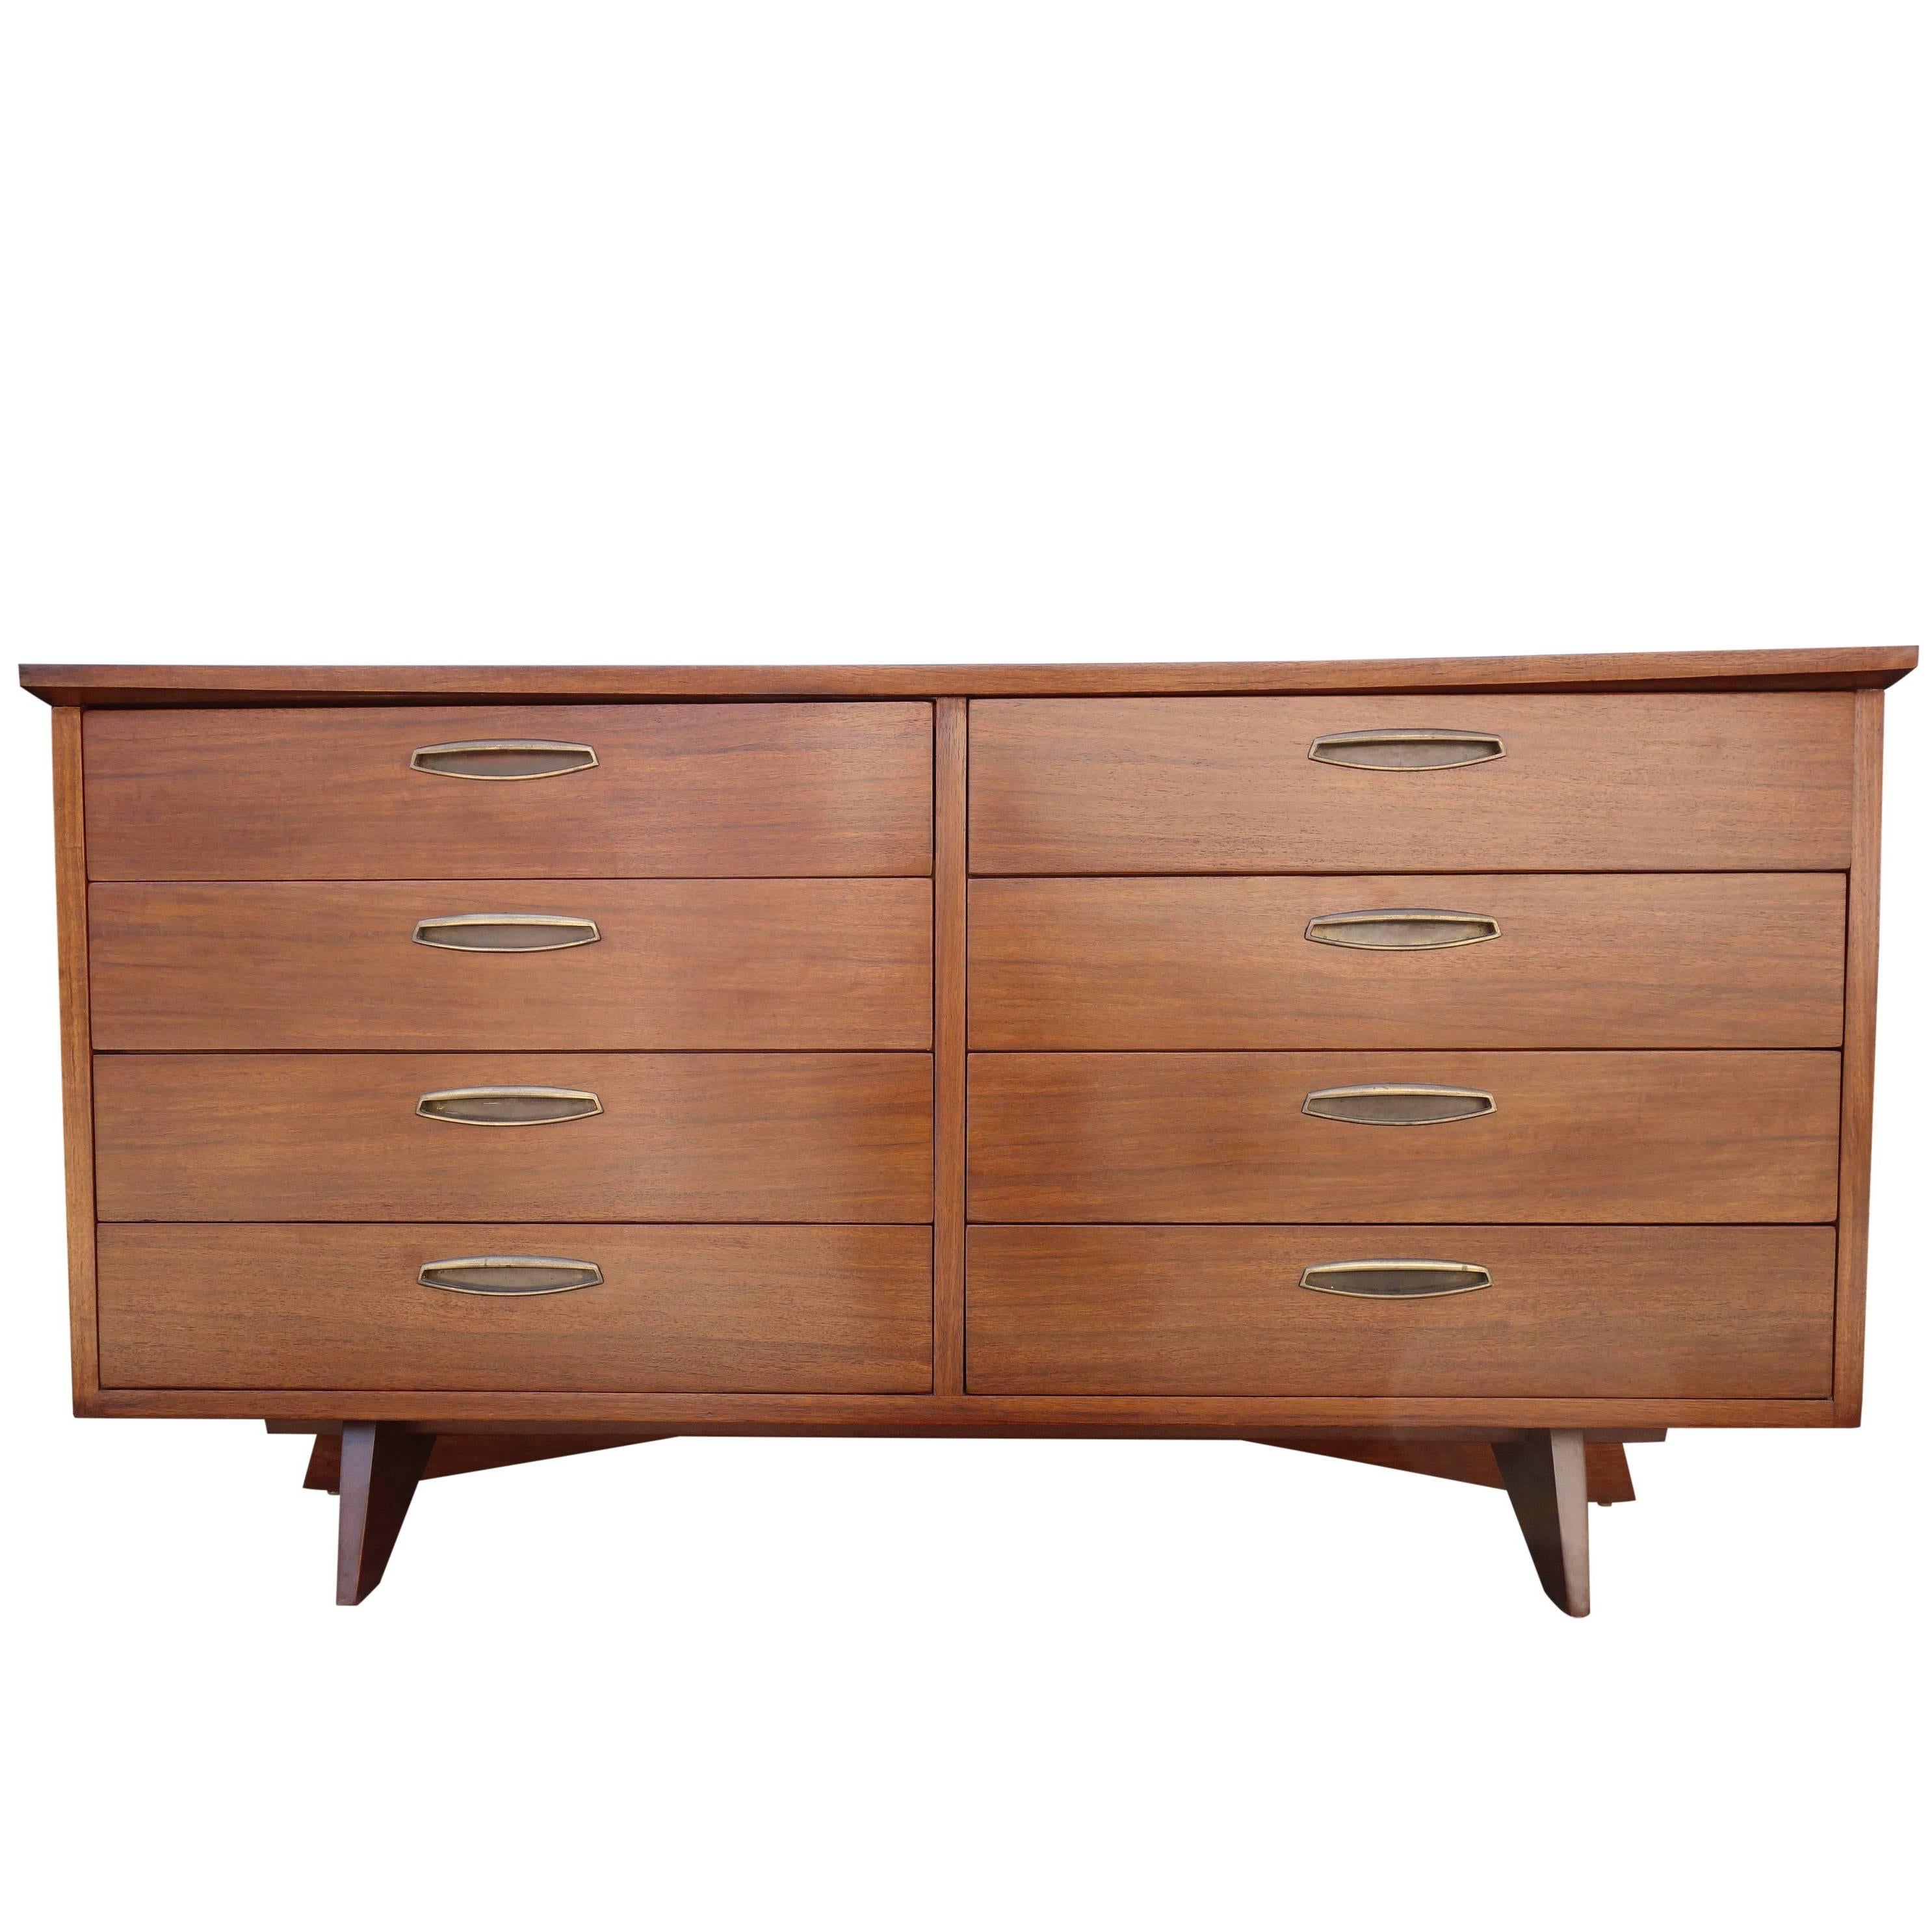 For your consideration is this incredible midcentury eight-drawer cabinet designed by George Nakashima. This case piece rests on a sculptural base featuring brass pulls in original condition. The cabinet has been finished like new while retaining